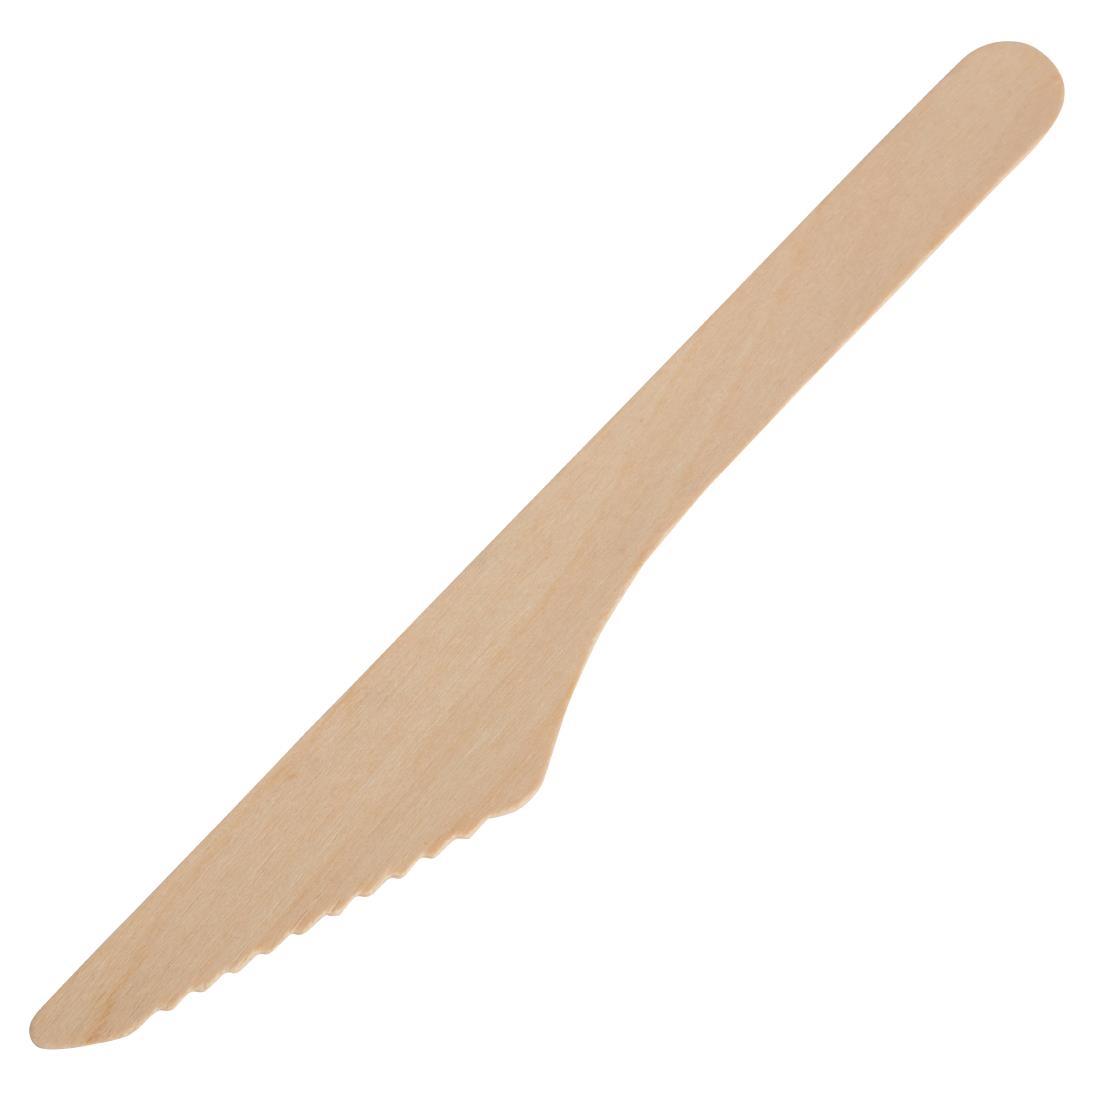 Fiesta Compostable Disposable Wooden Knives (Pack of 100) - CD902  - 1